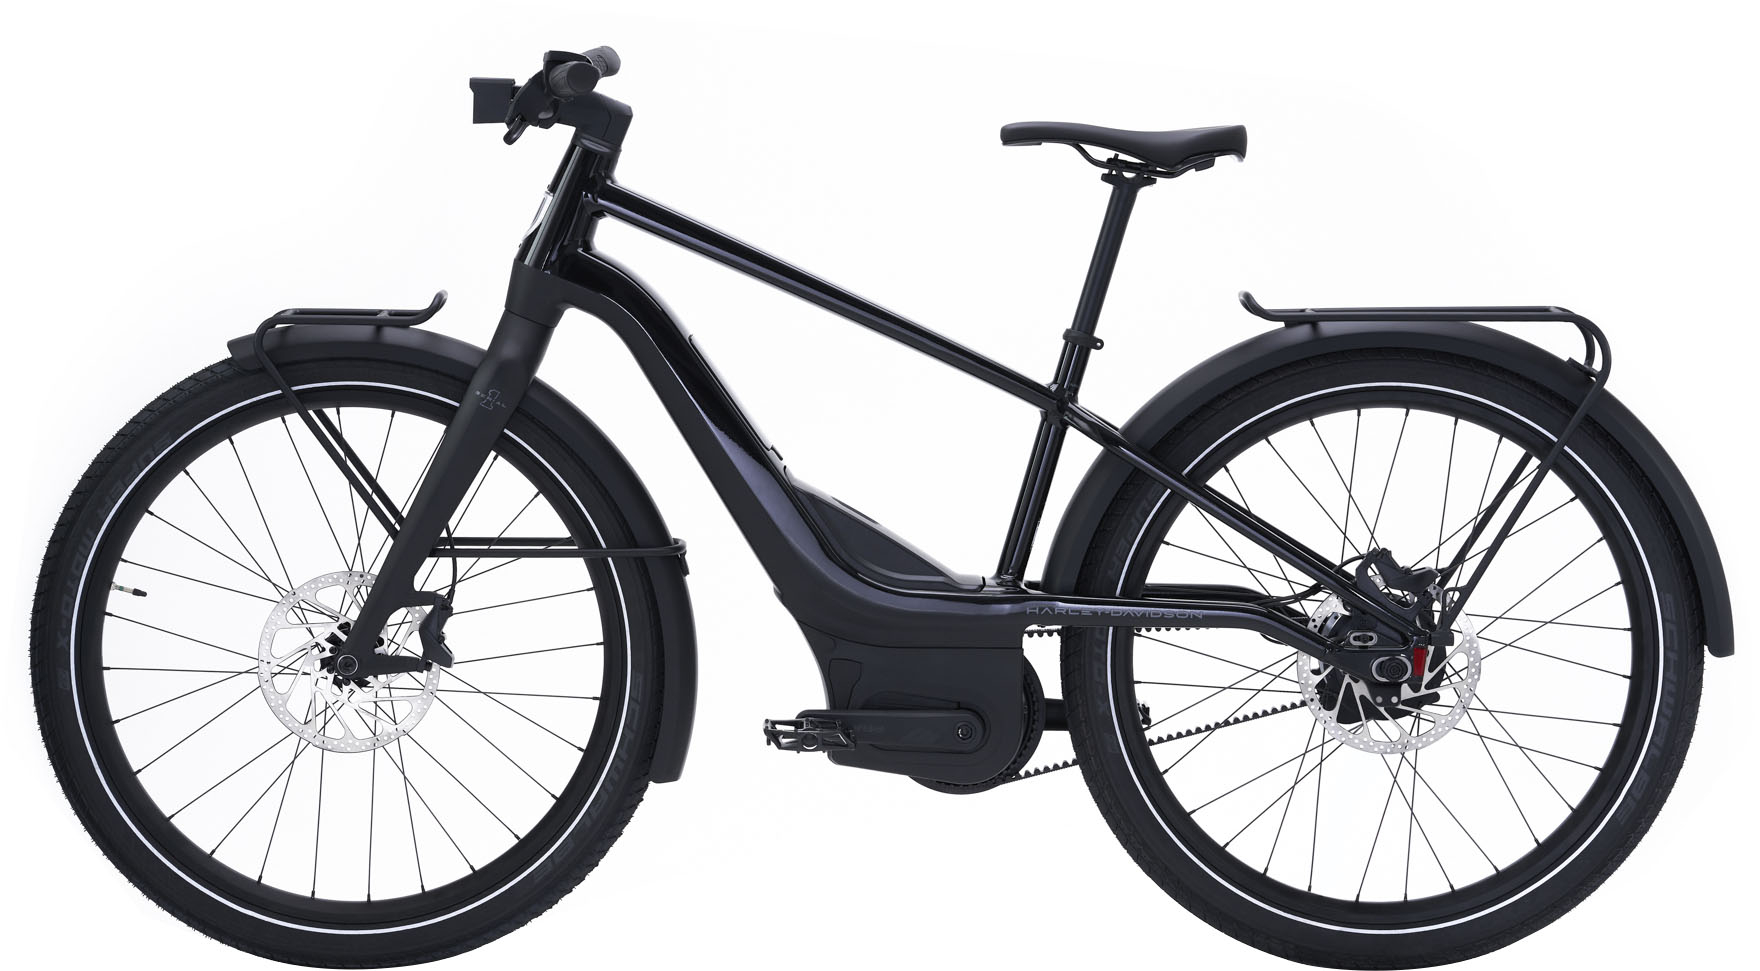 Angle View: Serial 1 - RUSH/CTY eBike, w/ up to 115mi Max Operating Range & 20mph Max Speed - Black